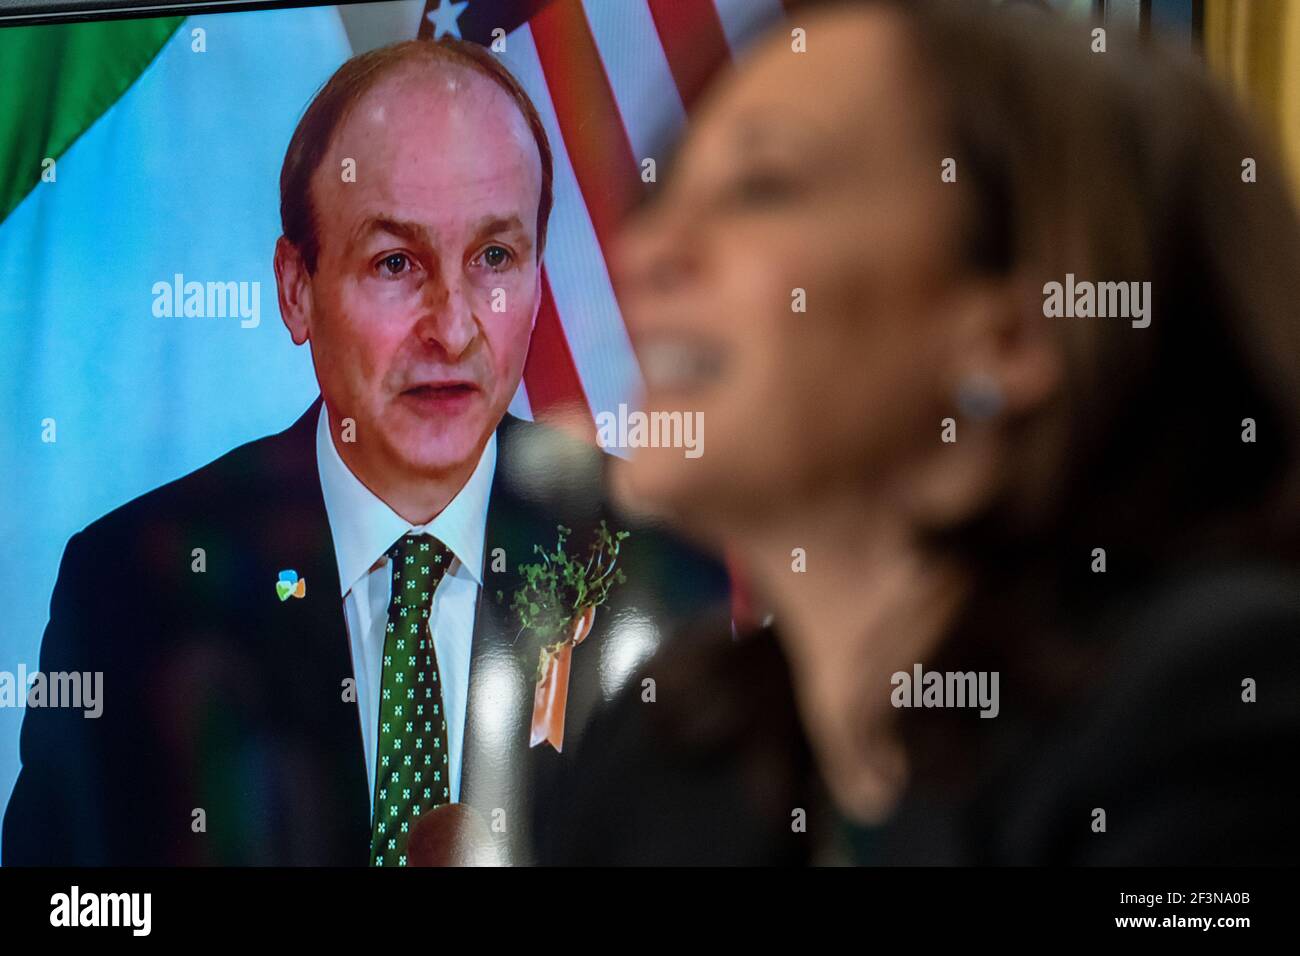 Washington, United States. 17th Mar, 2021. United States Vice President Kamala Harris hosts Irish Prime Minister Micheál Martin during a virtual bilateral meeting in the Vice President's Ceremonial Office in Washington, DC on St. Patrick's Day, Wednesday, March 17, 2021. Photo by Ken Cedeno/UPI Credit: UPI/Alamy Live News Stock Photo